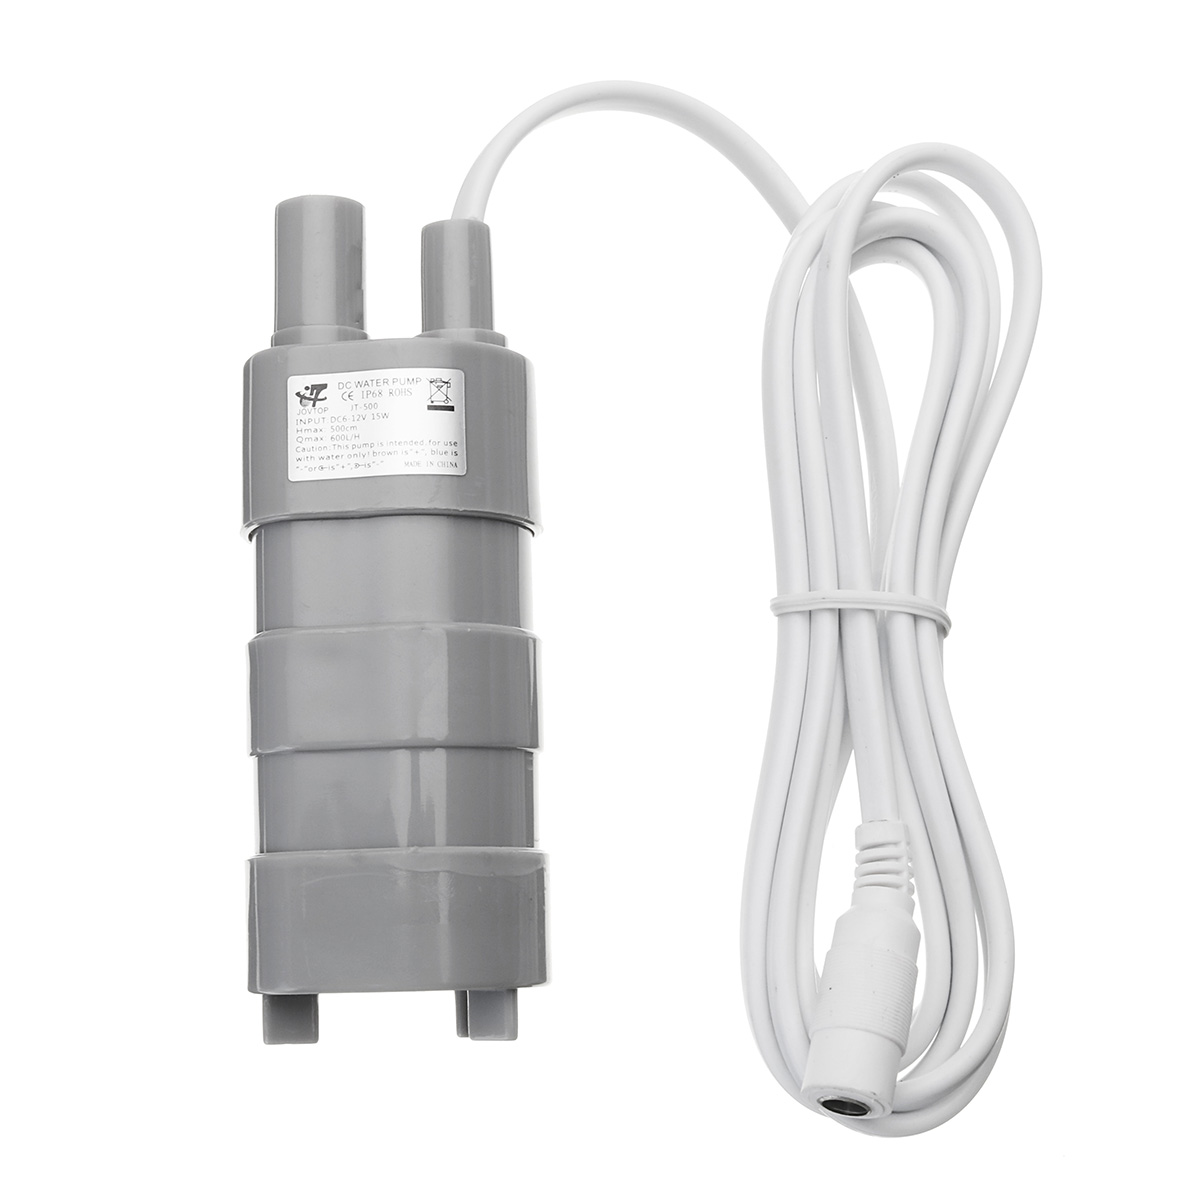 High-Efficiency JT-500 DC 12V Brushless Magnetic Submersible Water Pump 600 L/H Flow 5m Water Head Energy-Saving & Low-Noise Ideal for Fountains and Aquariums